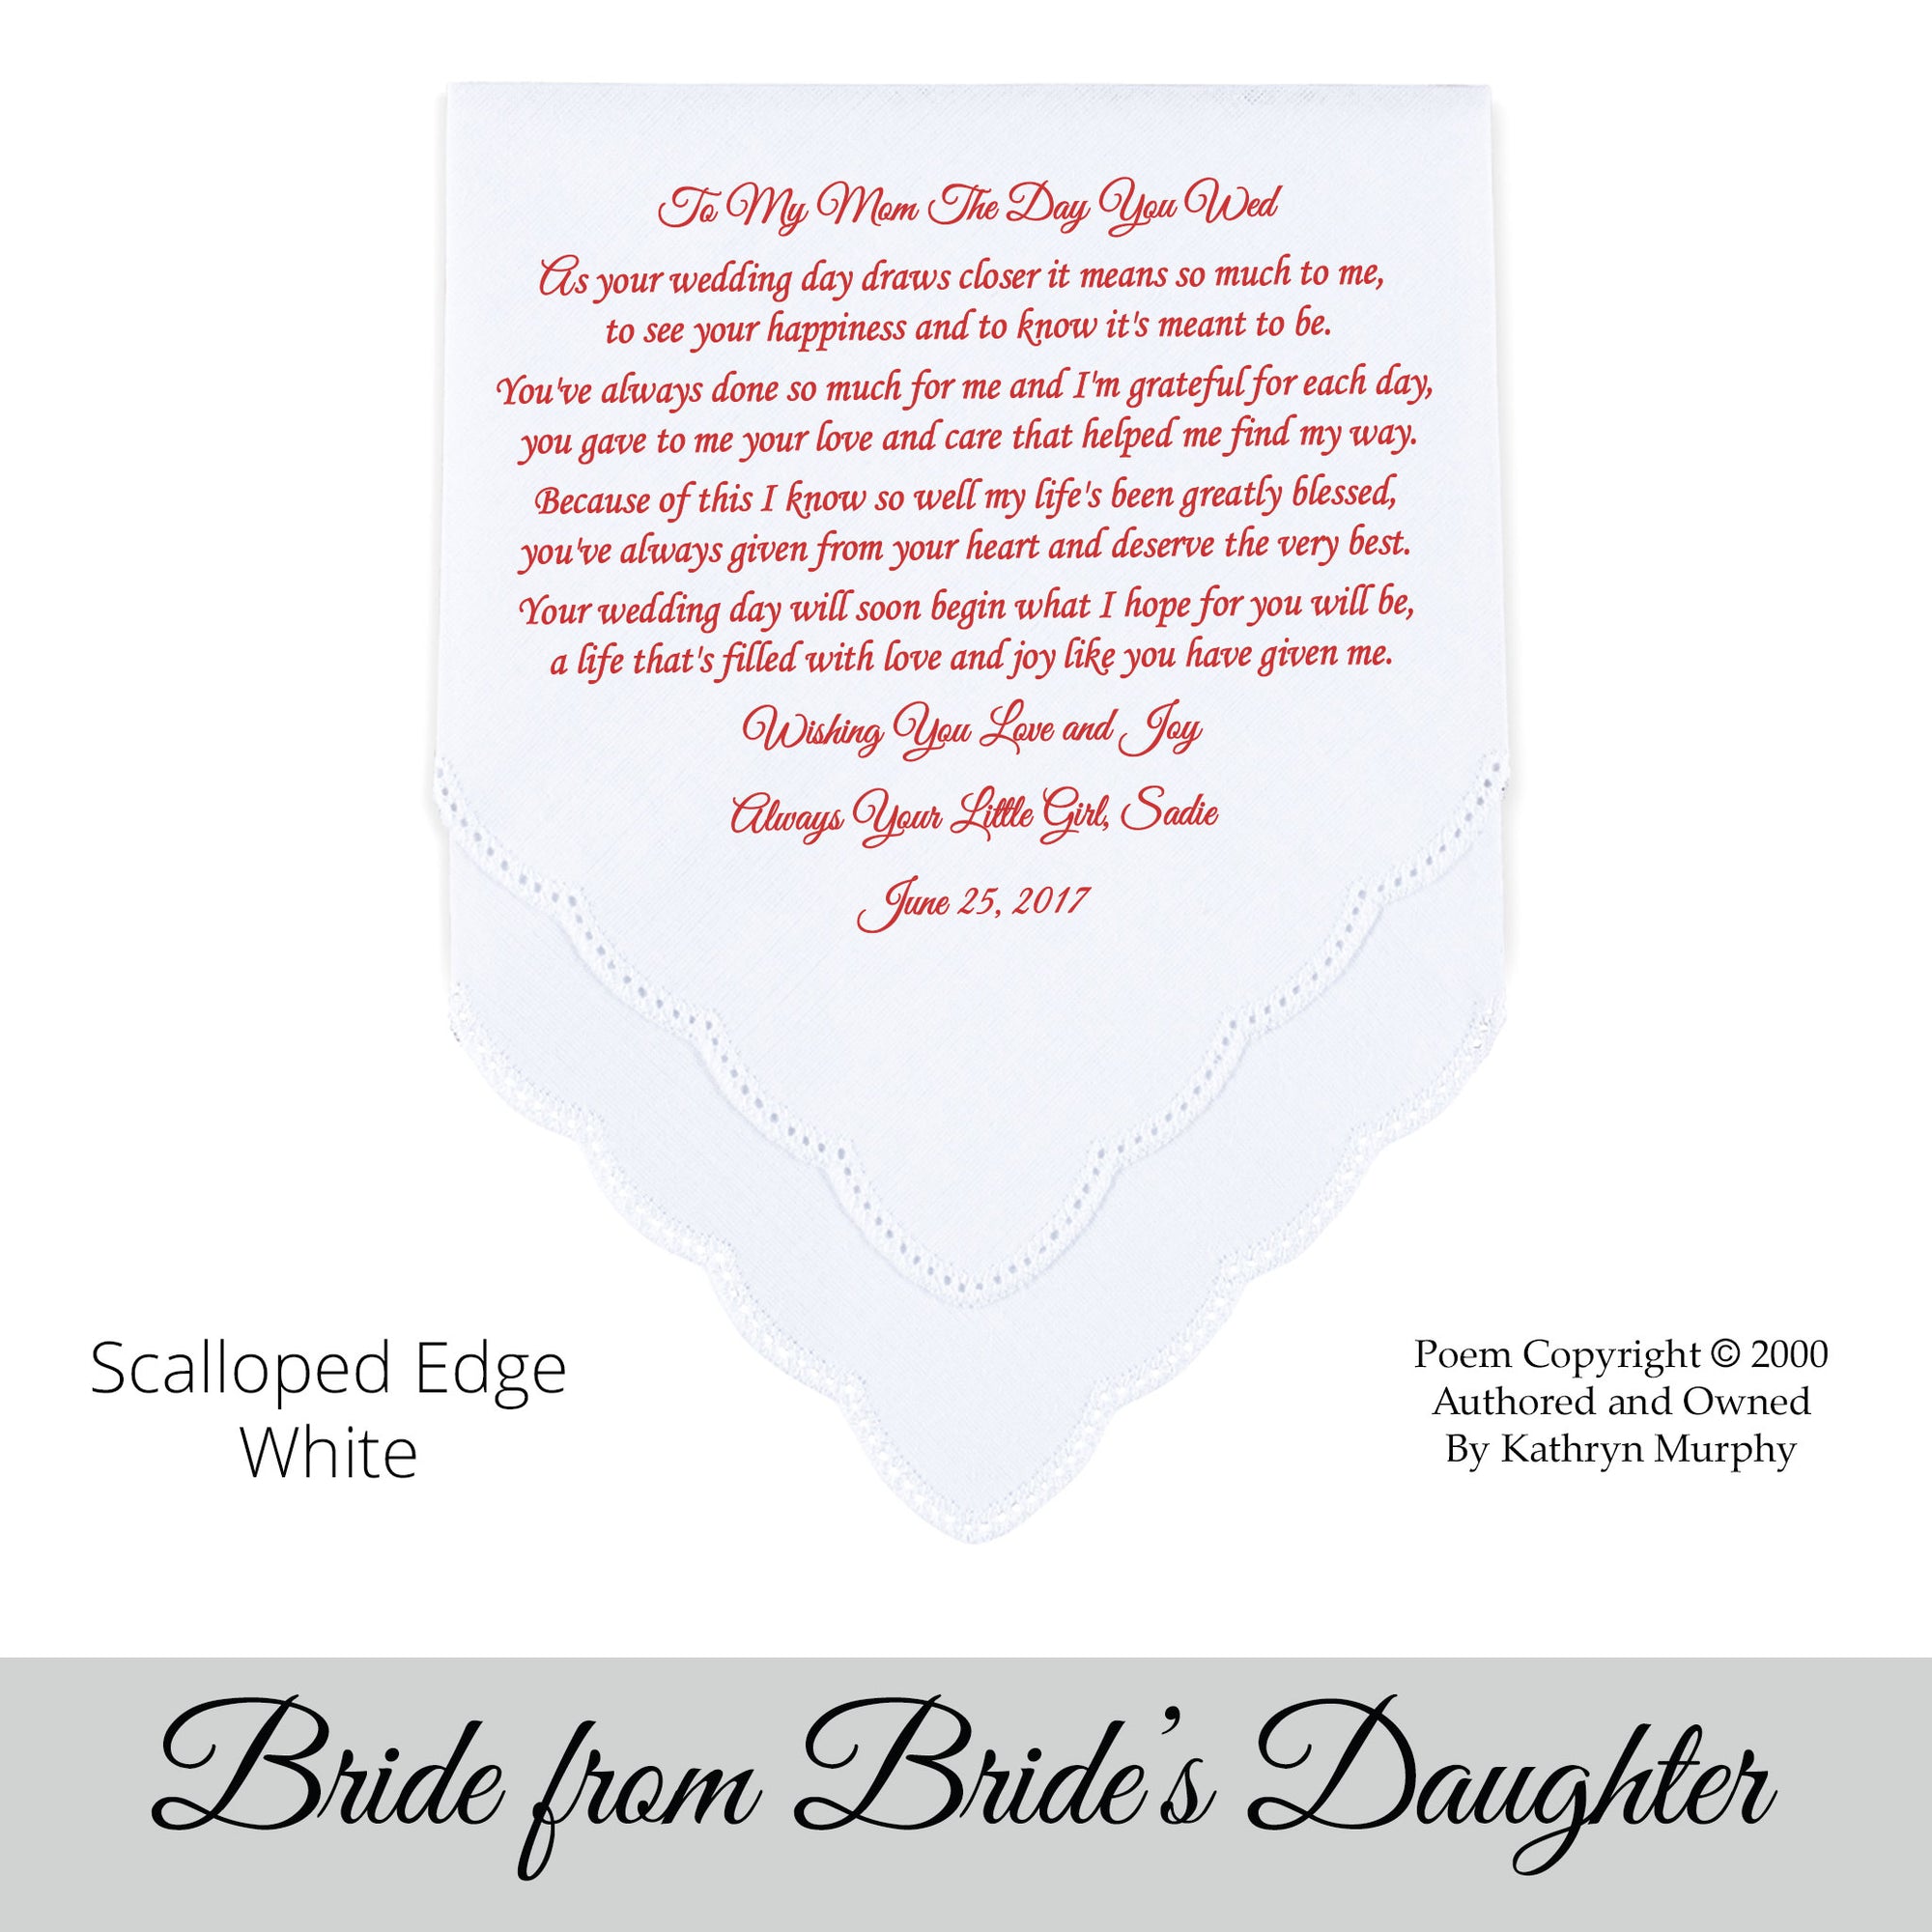 Gift for the Bride wedding hankie with the poem from her daughter or son